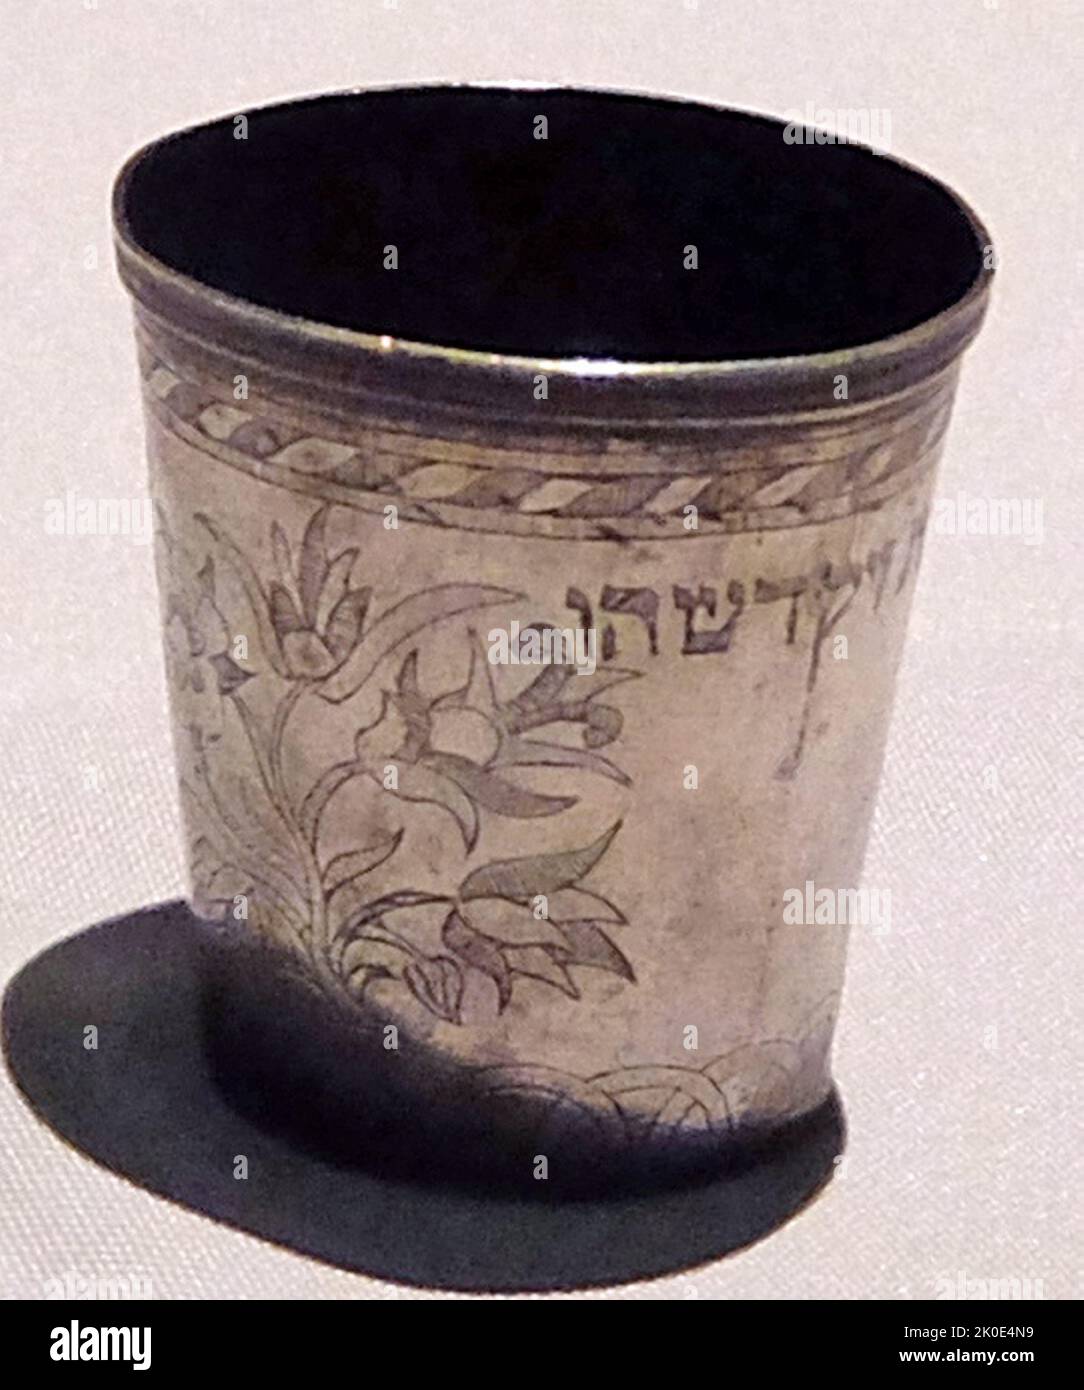 Cup for blessing over, wine, kiddush on the Jewish Sabbath. After saying the prayer, the head of the family sips the wine from the Kiddush goblet and passes it on to family members and other participants in the Sabbath meal, 2021. Stock Photo